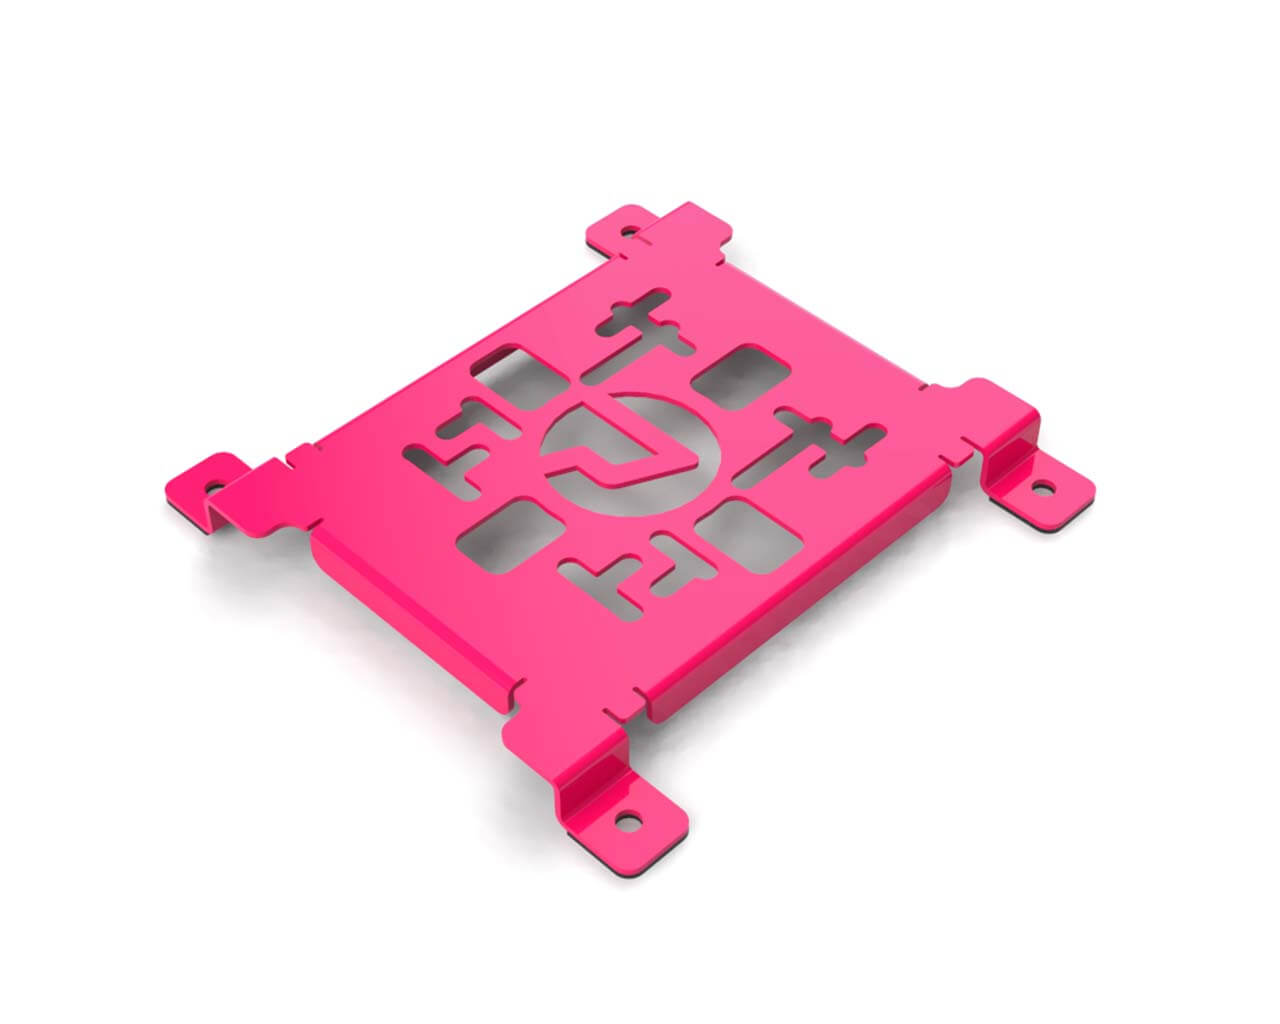 PrimoChill SX Spider Mount Bracket - 120mm Series - PrimoChill - KEEPING IT COOL UV Pink